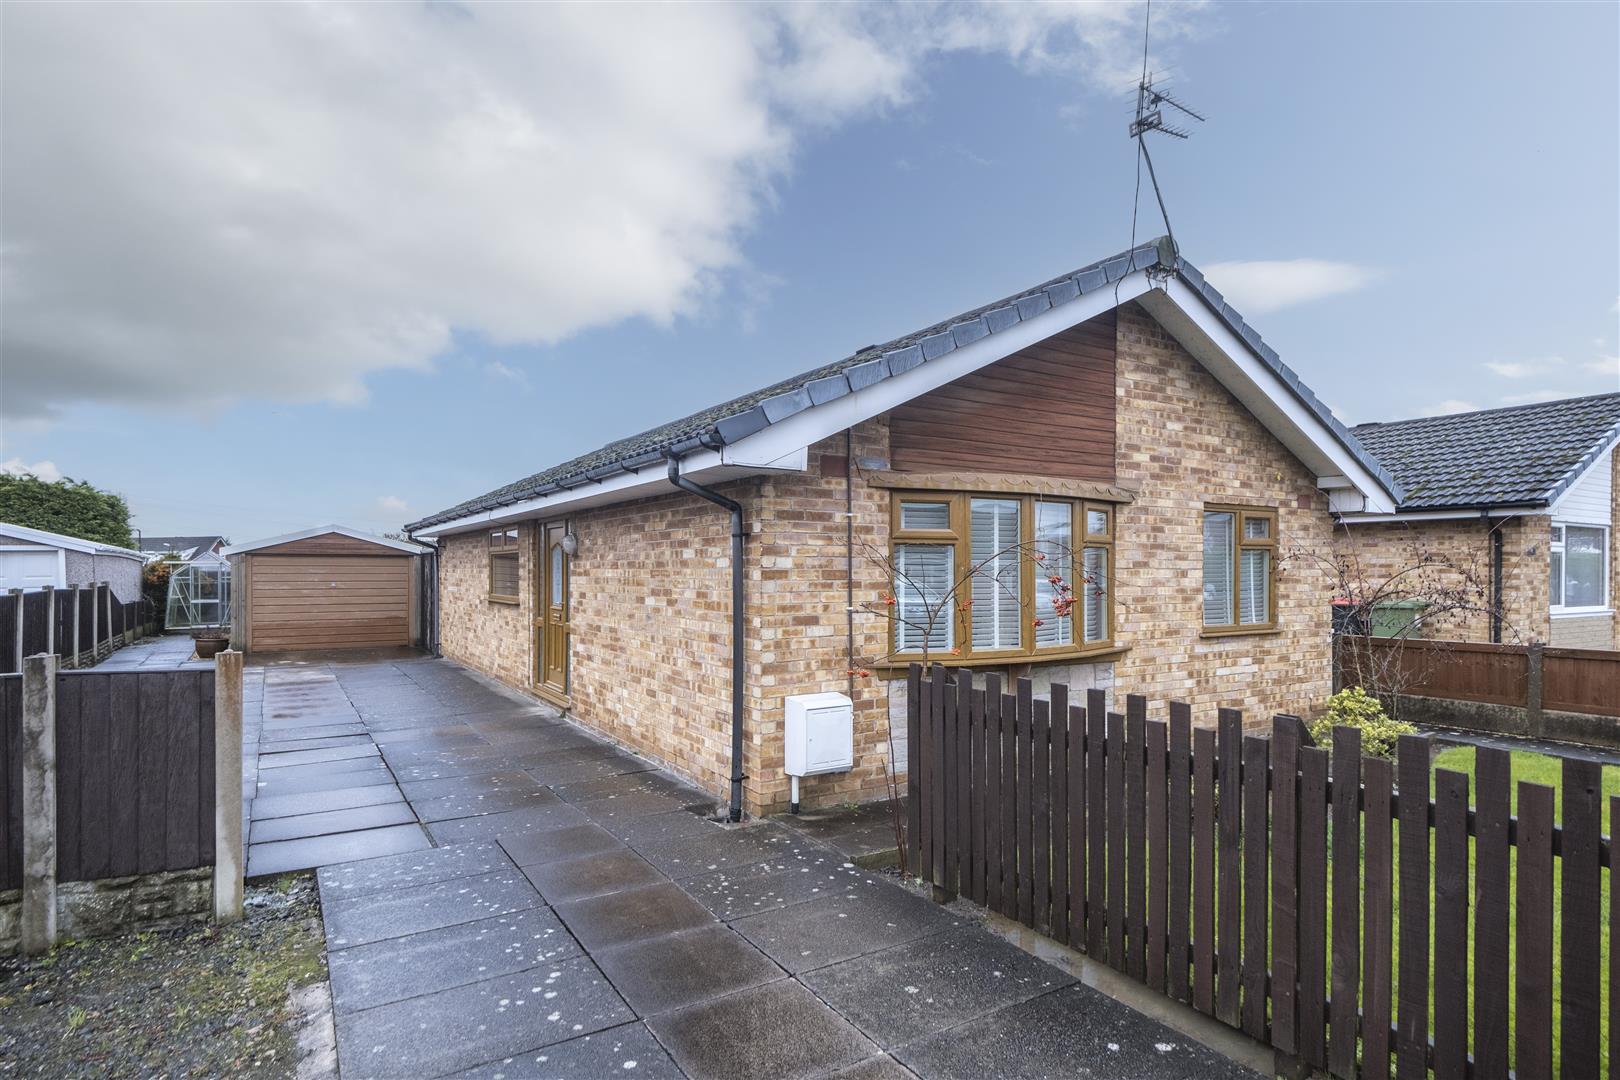 3 bedroom  Bungalow for Sale in Winsford